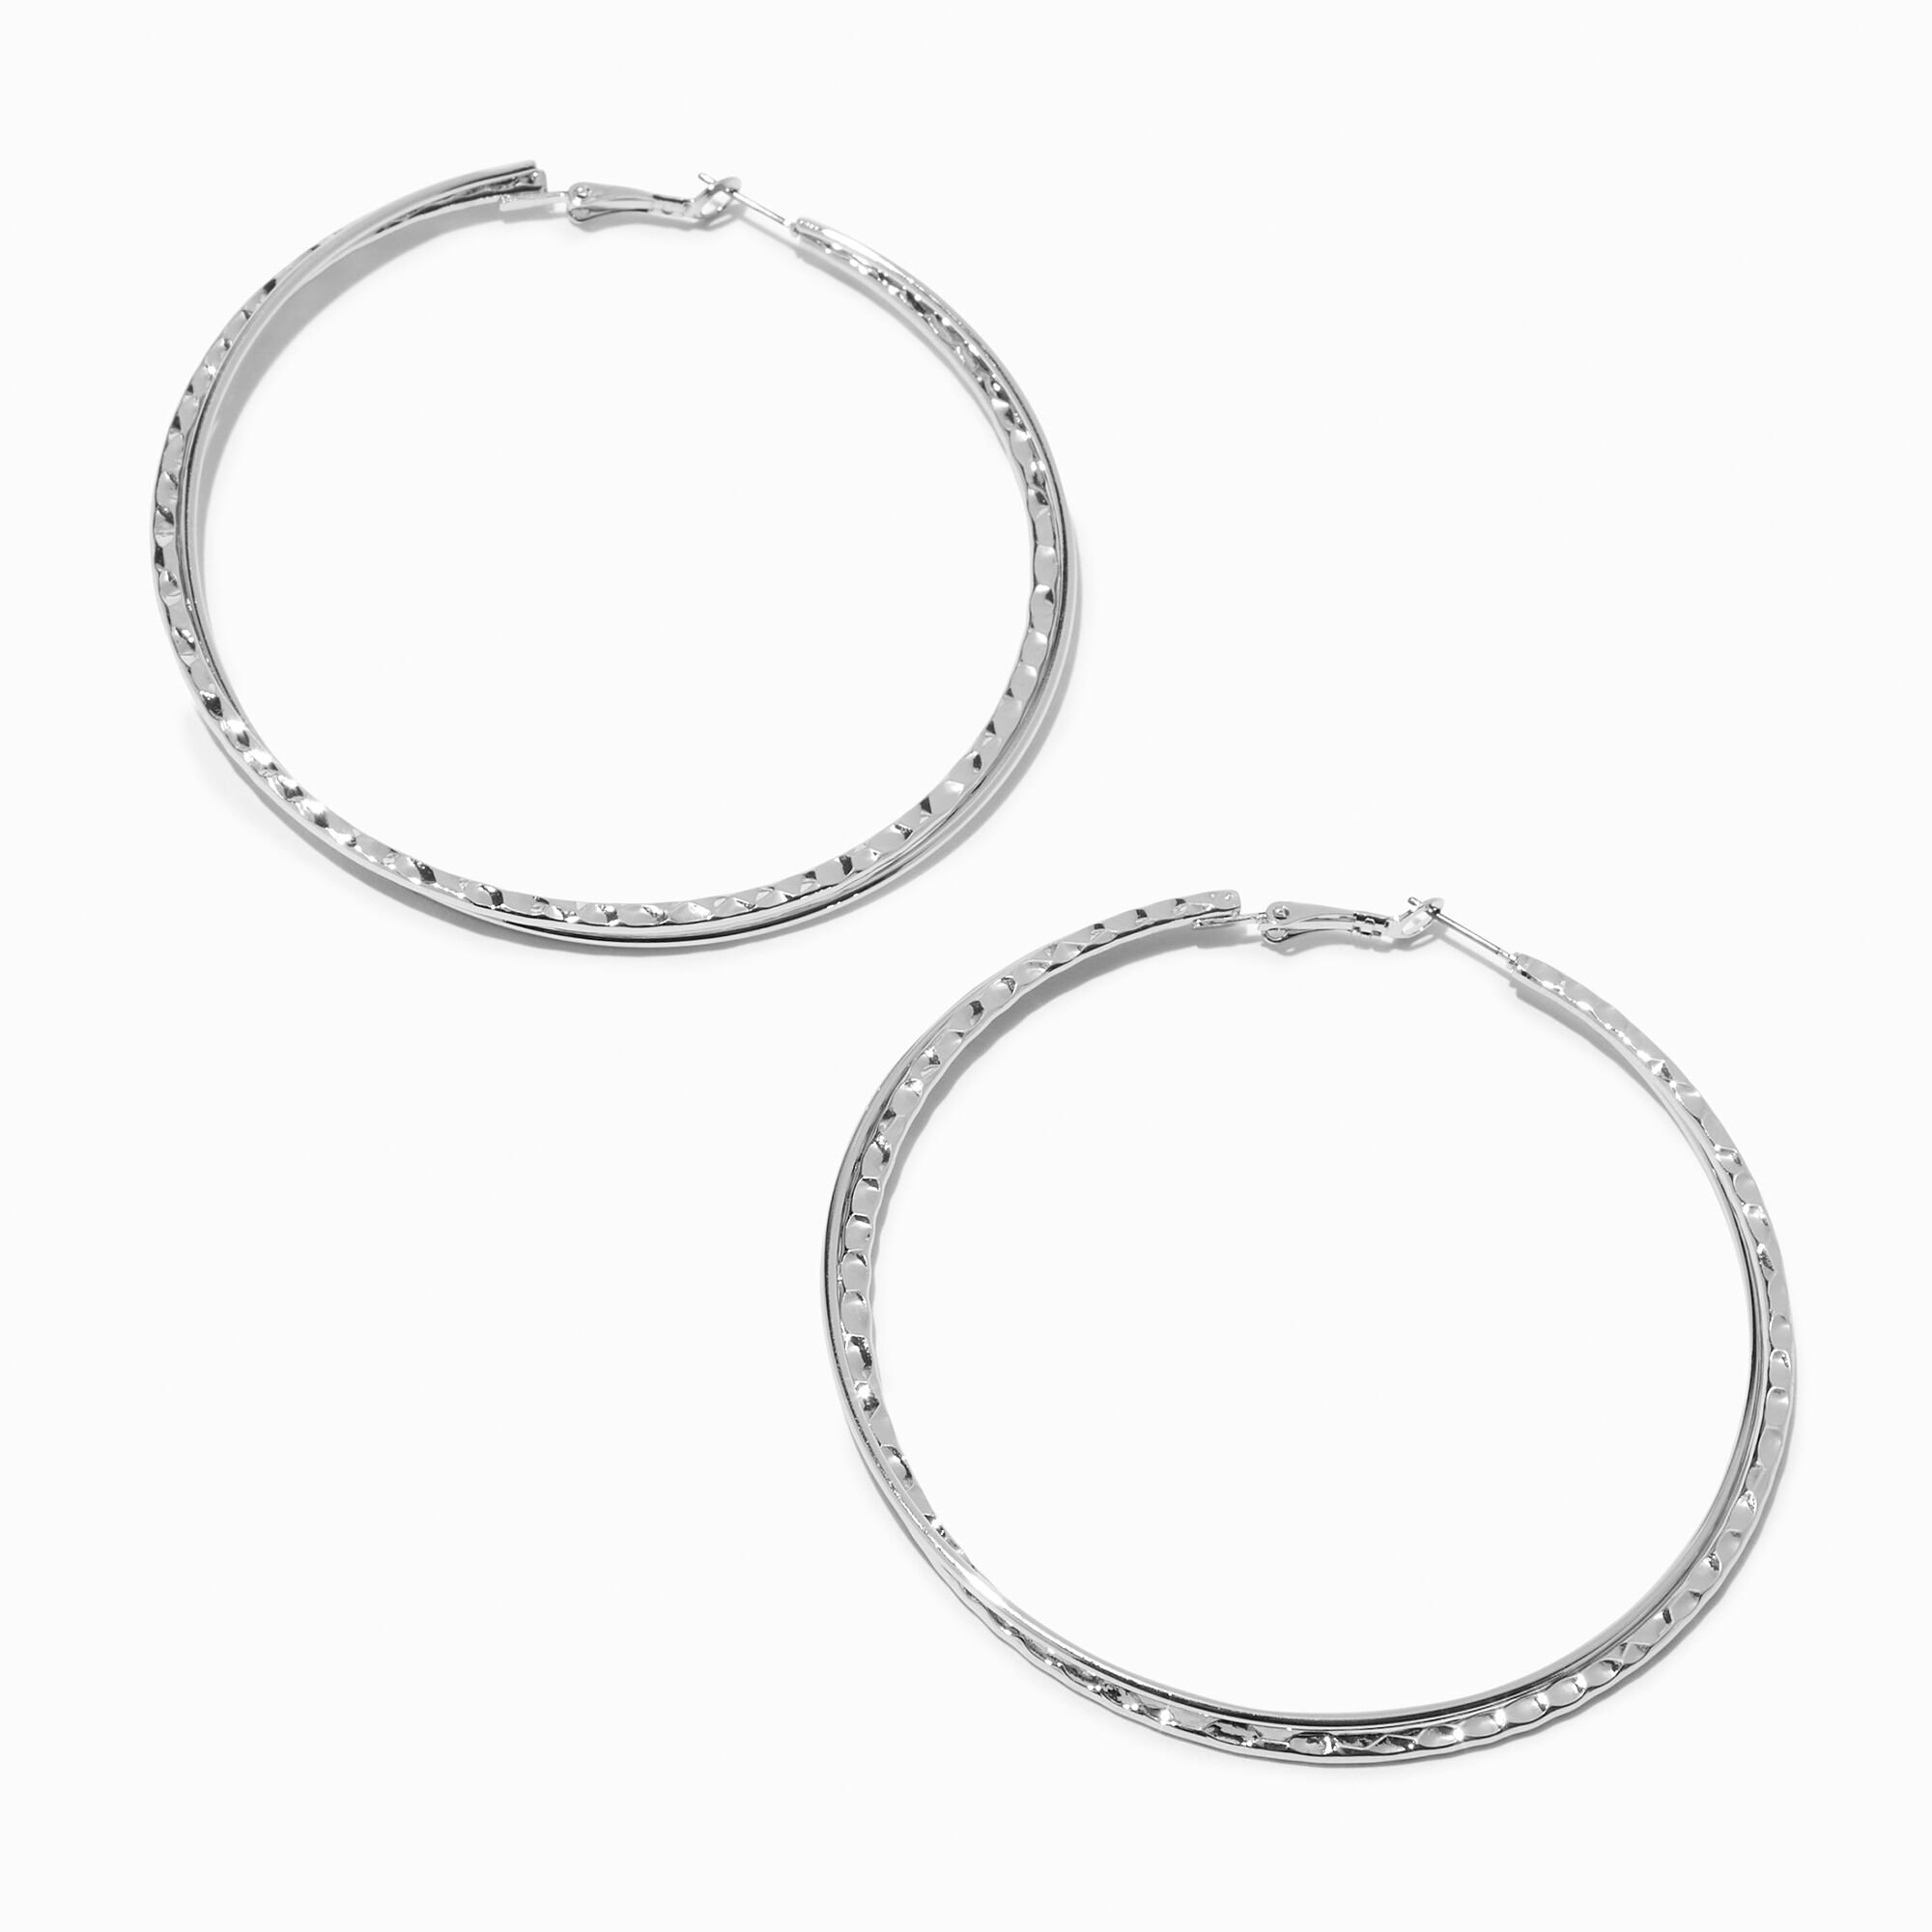 View Claires Tone 80MM Twisty Hoop Earrings Silver information